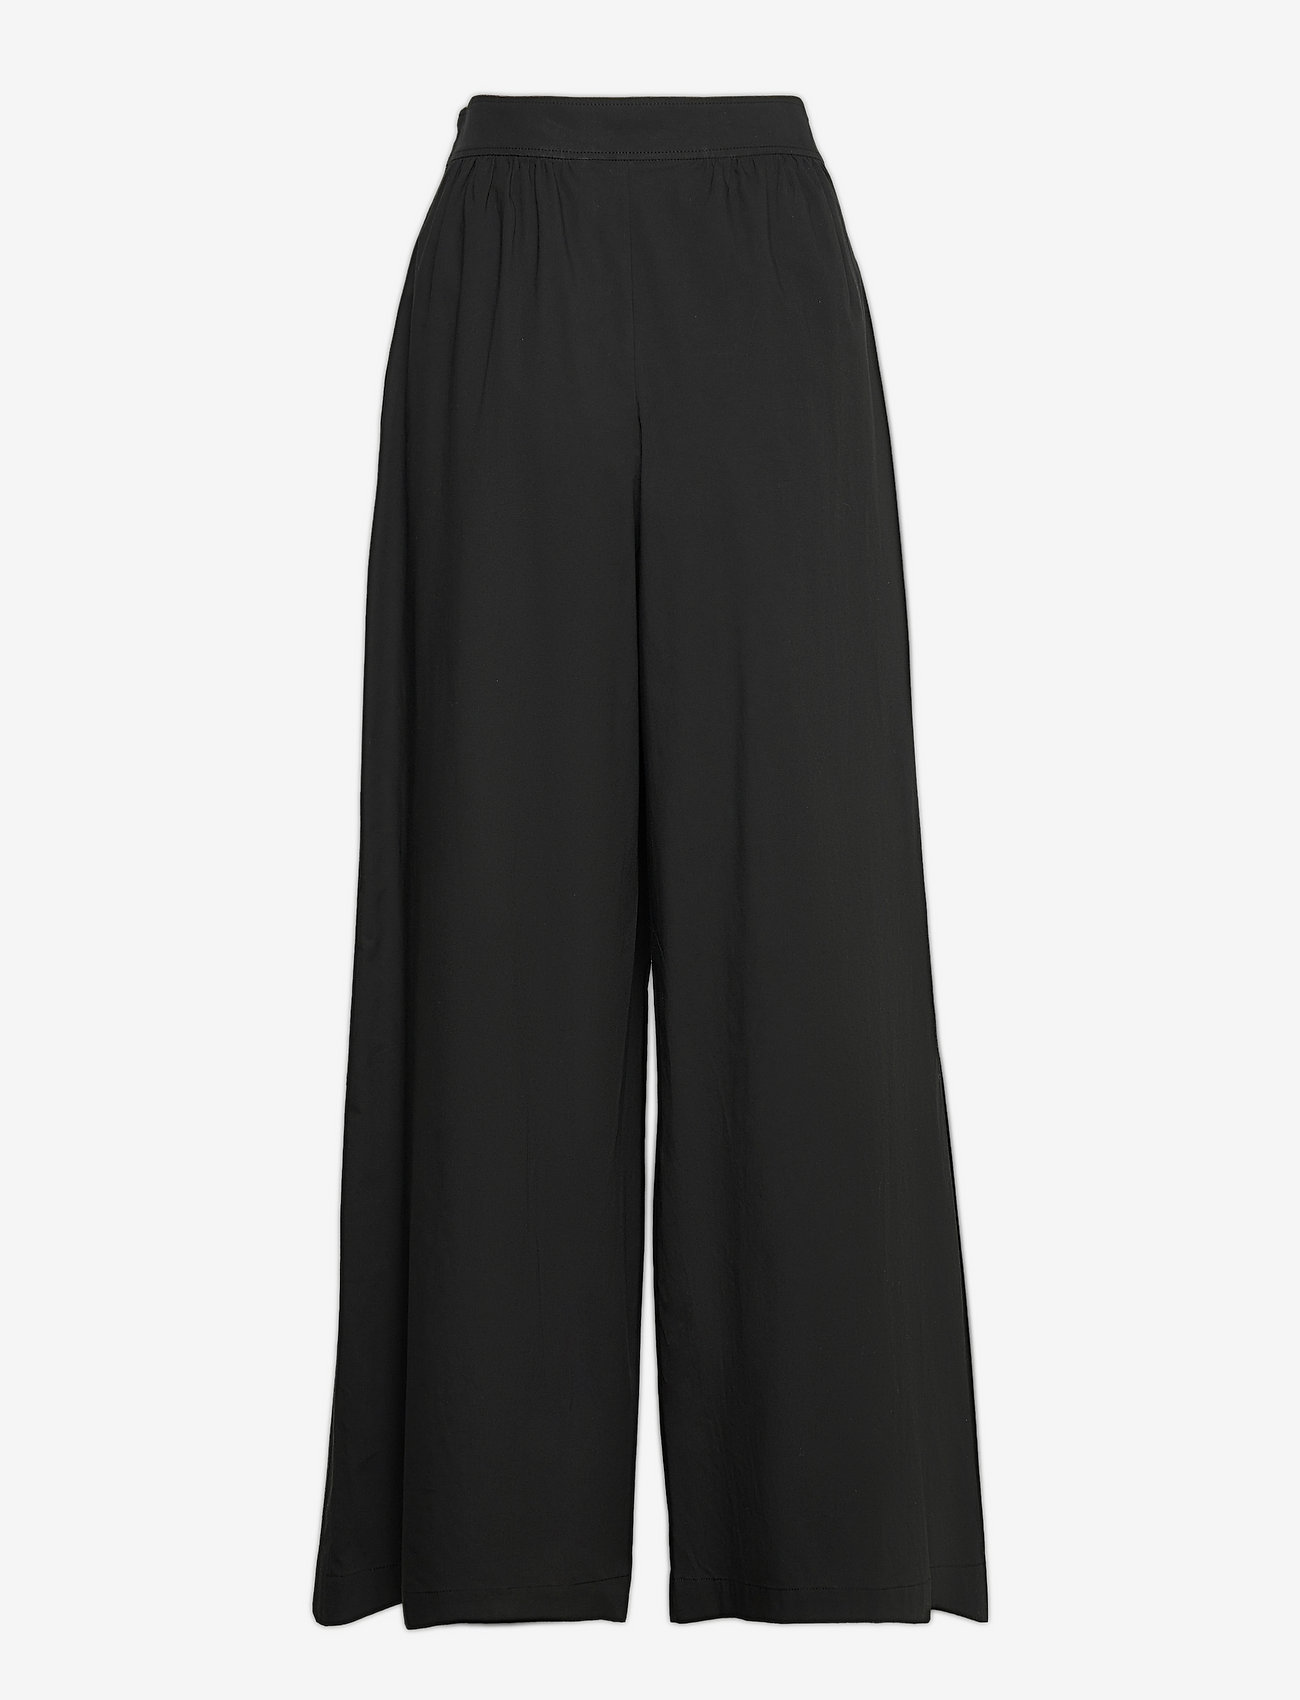 Boutique Moschino - Trousers - bukser med brede ben - black - 1